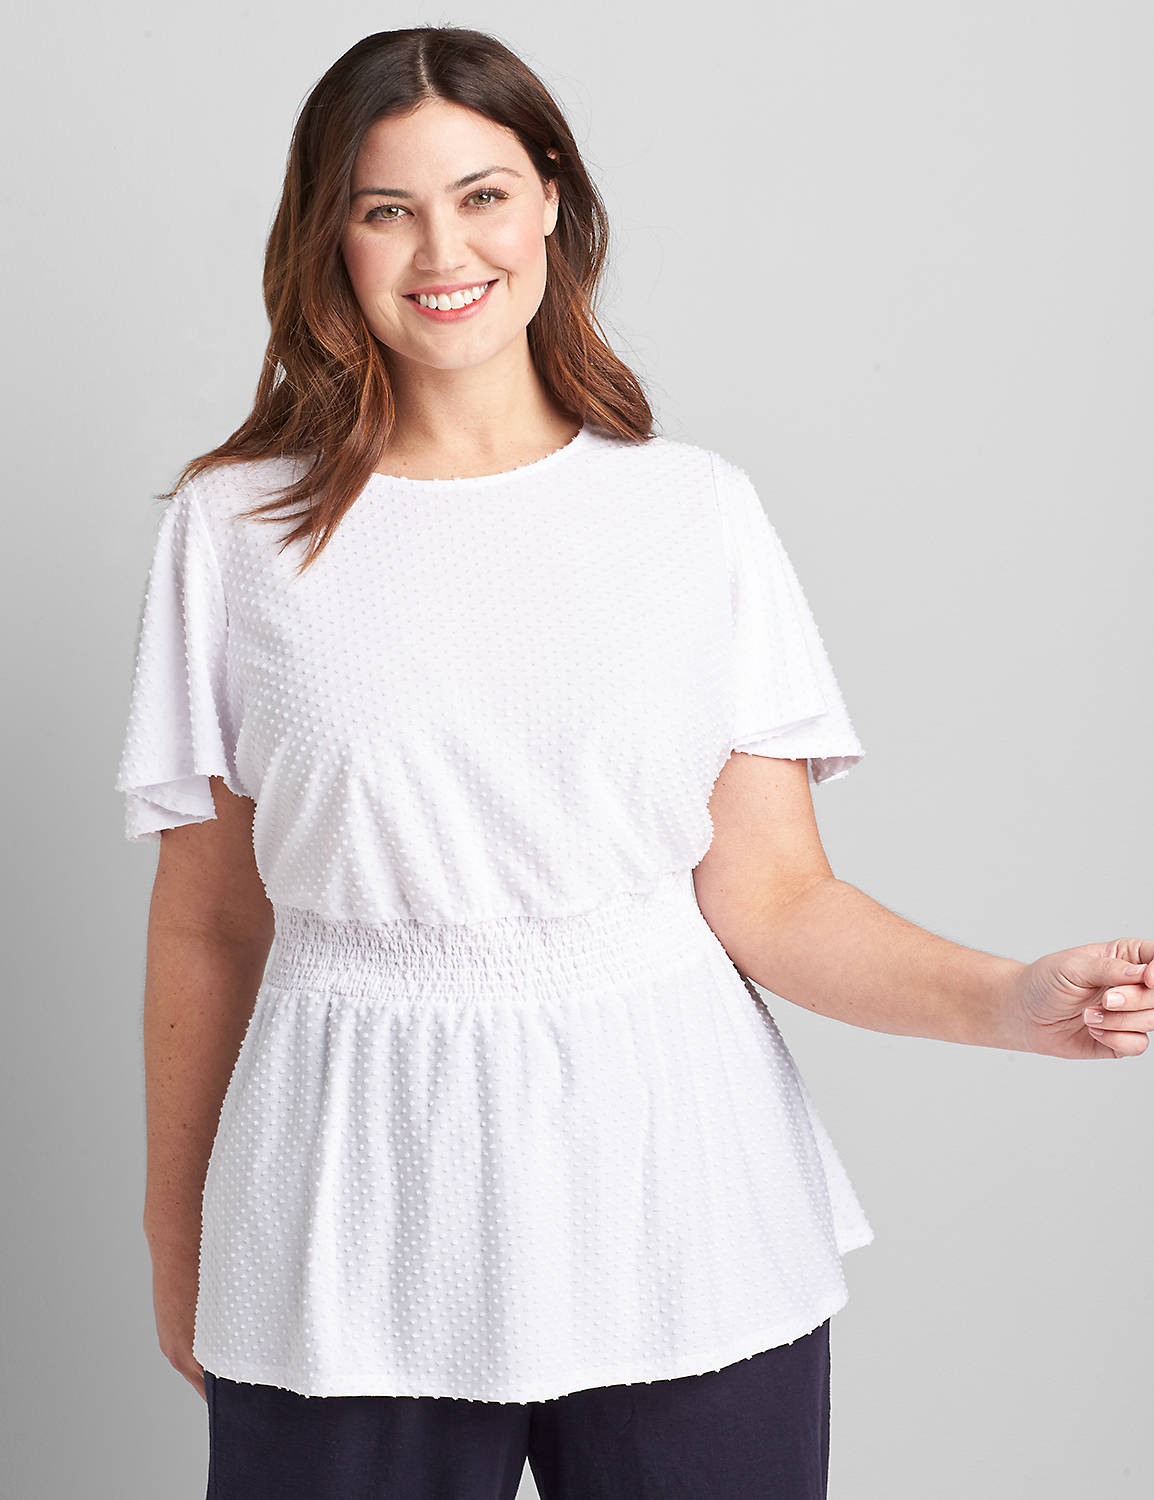 Short Sleeve Crew Neck Top With Waist Smocking In Swiss Dot 1121277:Ascena White:14/16 Product Image 1